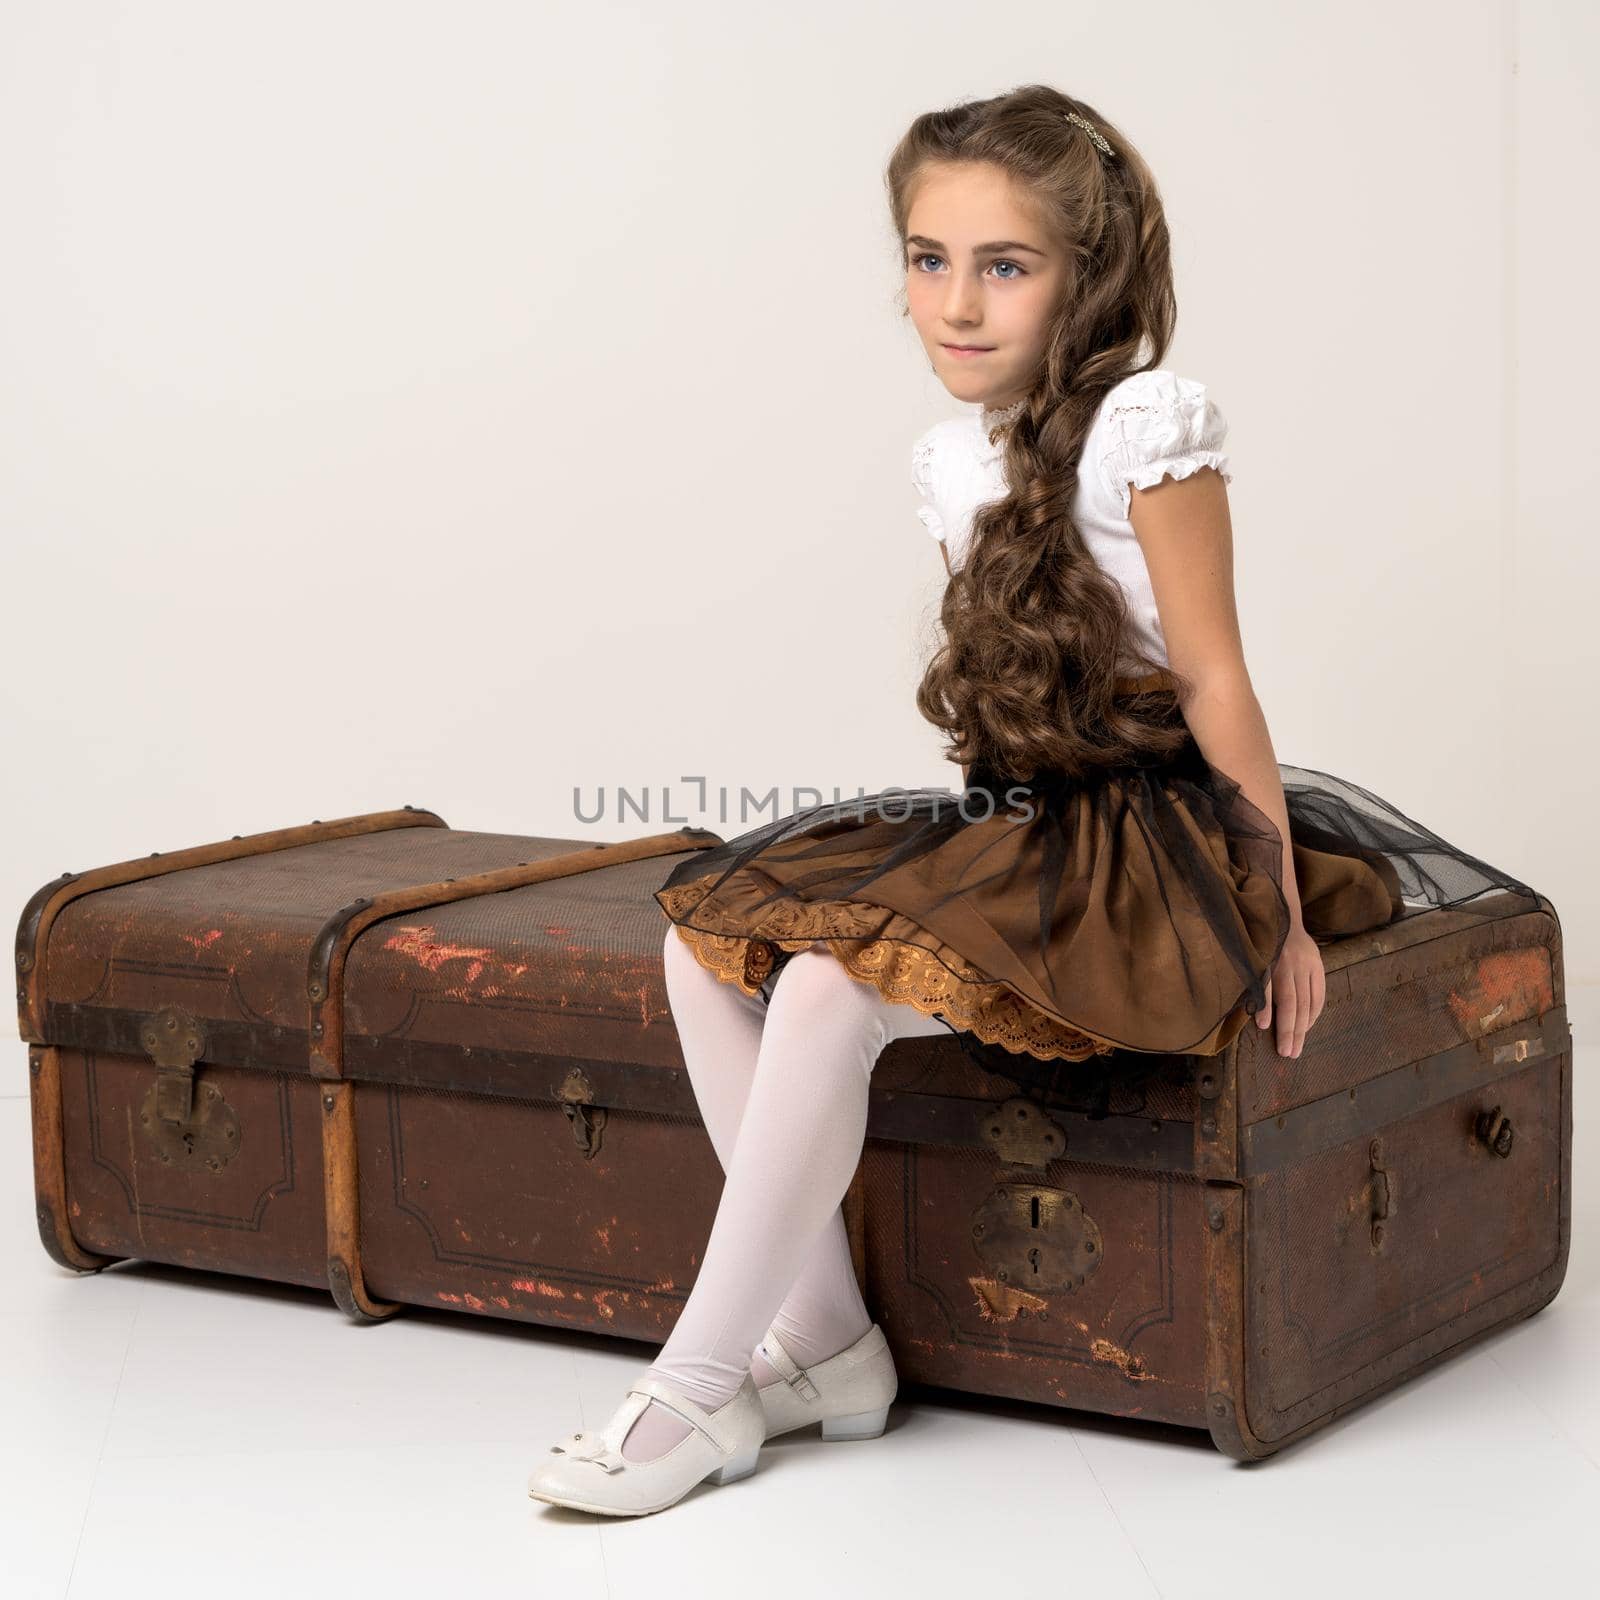 Little girl is sitting on a wooden box. Isolated on white background.